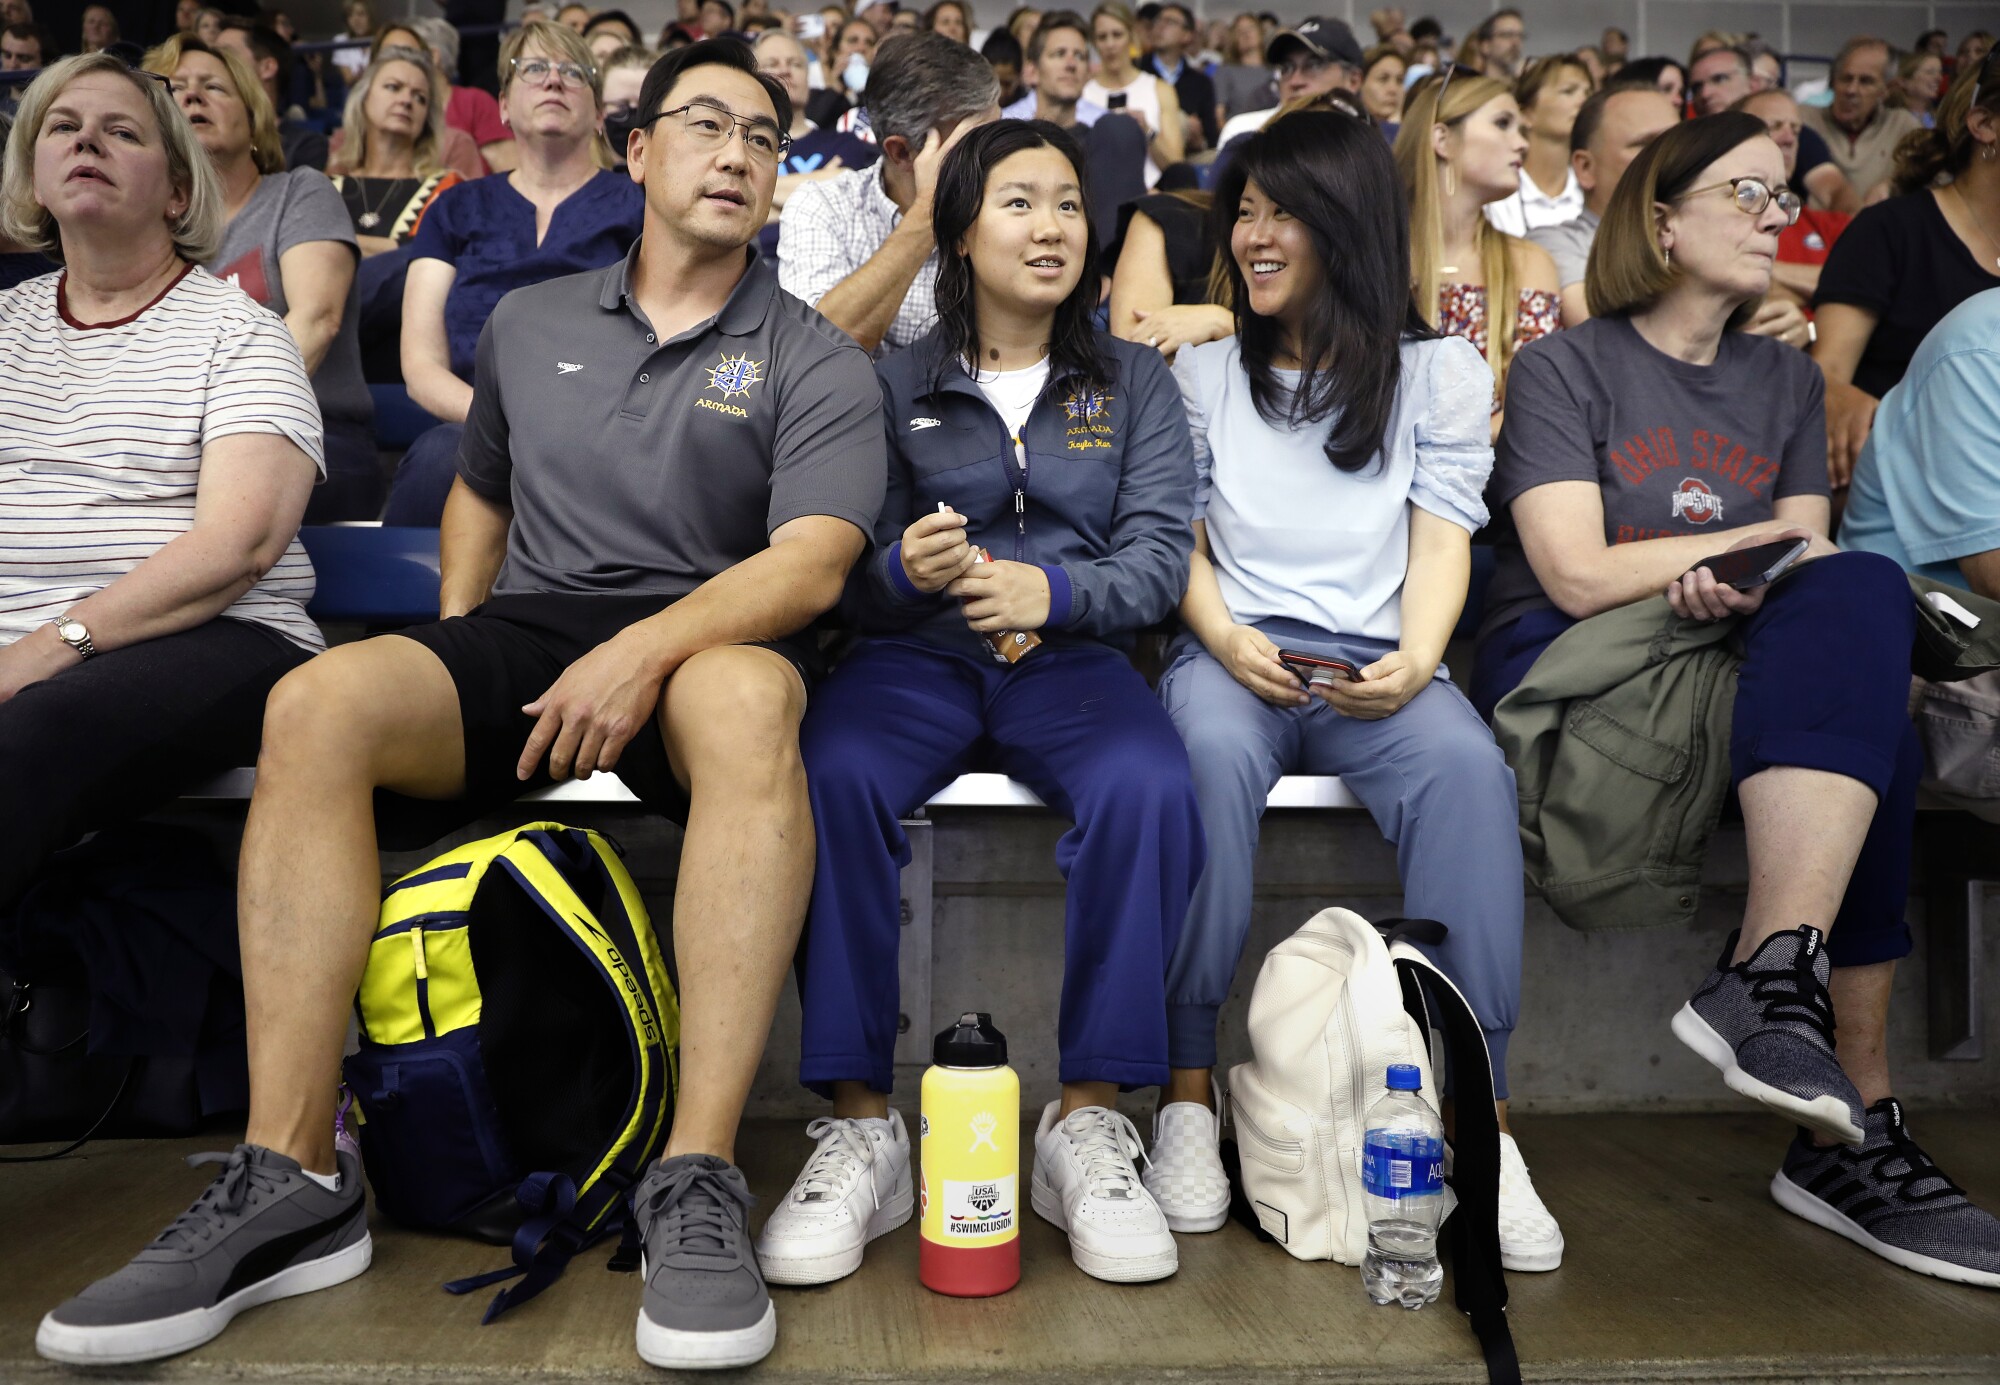 Kayla Han sits with her parents Dan and Kim in the stands after competing in the 2022 Phillips 66 International Team Trials.